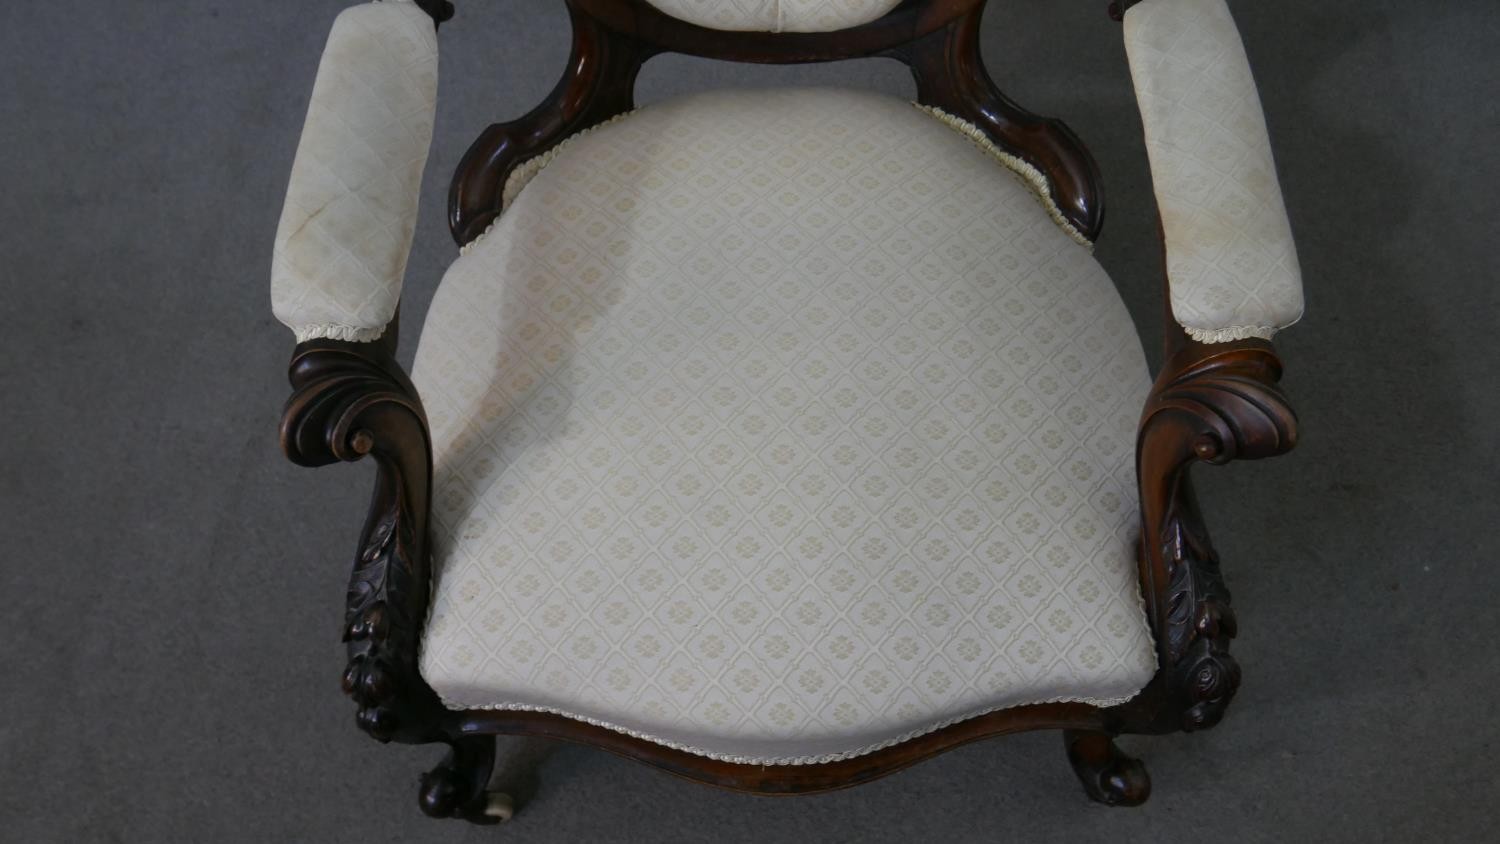 A Victorian walnut open armchair, upholstered in patterned ivory fabric, with an oval buttoned back, - Image 3 of 7